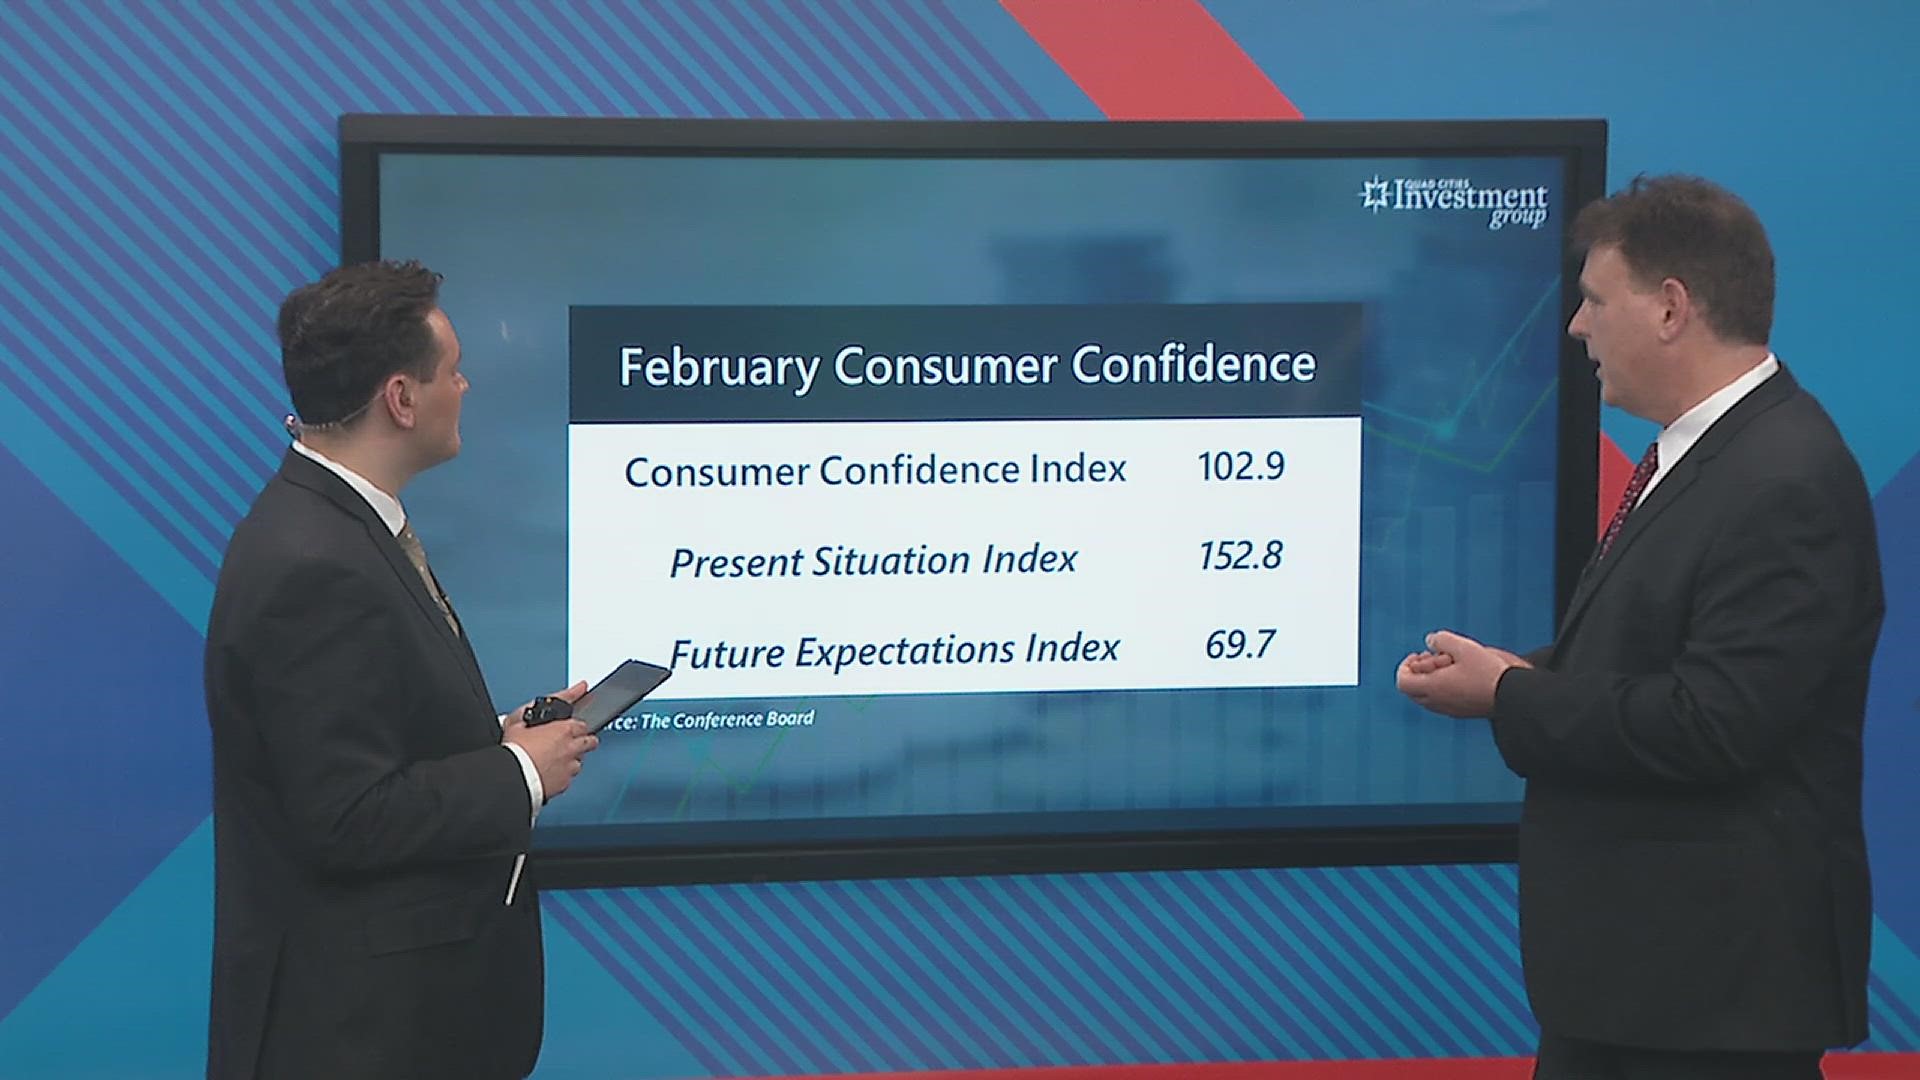 The Consumer Confidence Index for February gave consumers a score of 102.9, telling us that Americans are optimistic about the state of the economy, albeit slightly.